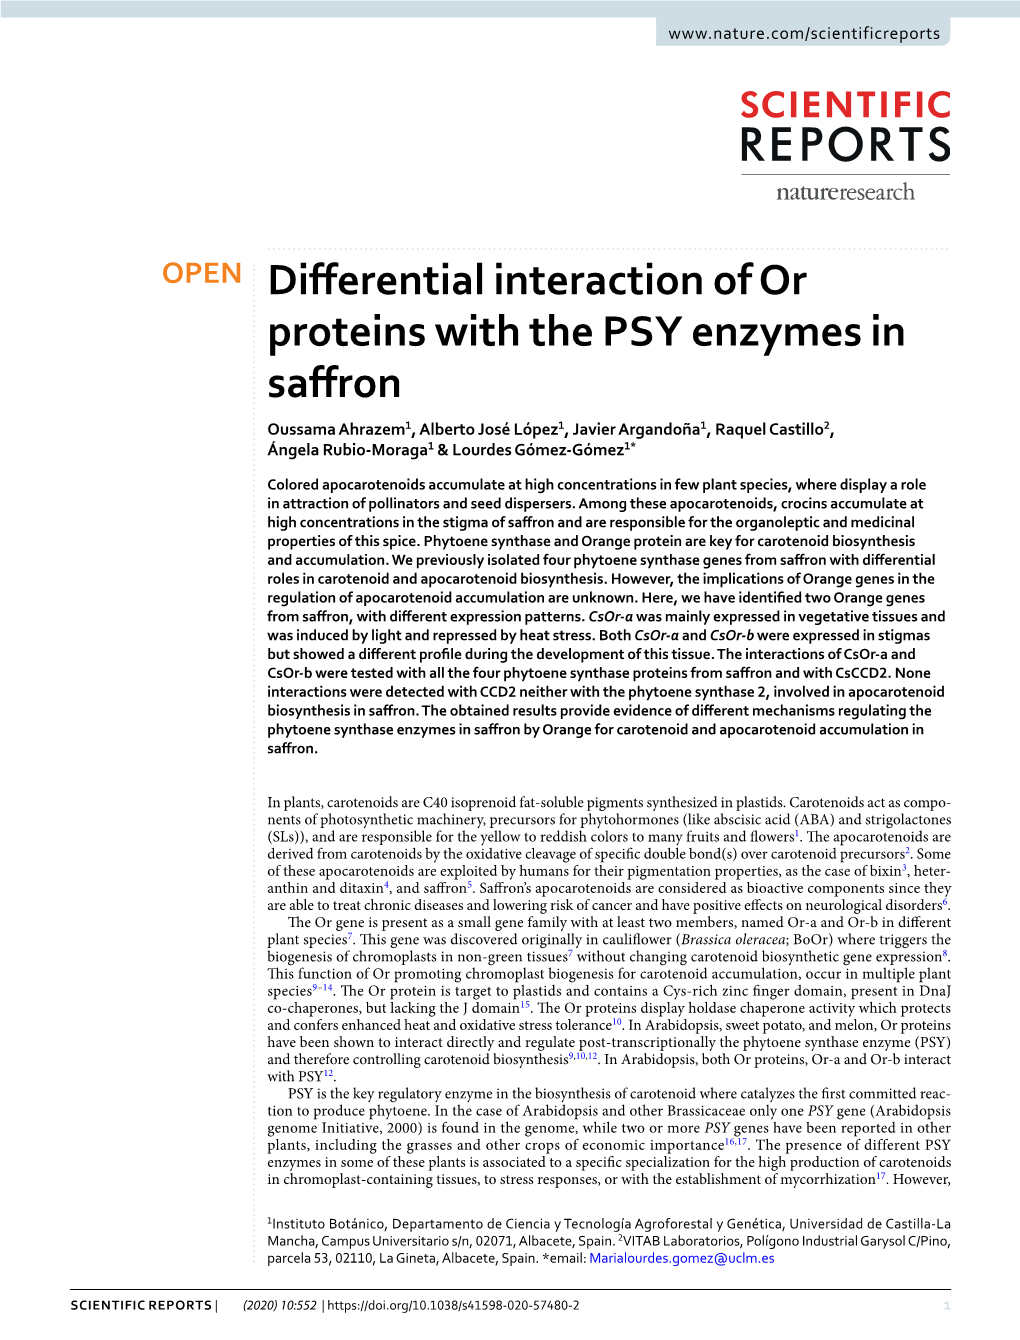 Differential Interaction of Or Proteins with the PSY Enzymes in Saffron